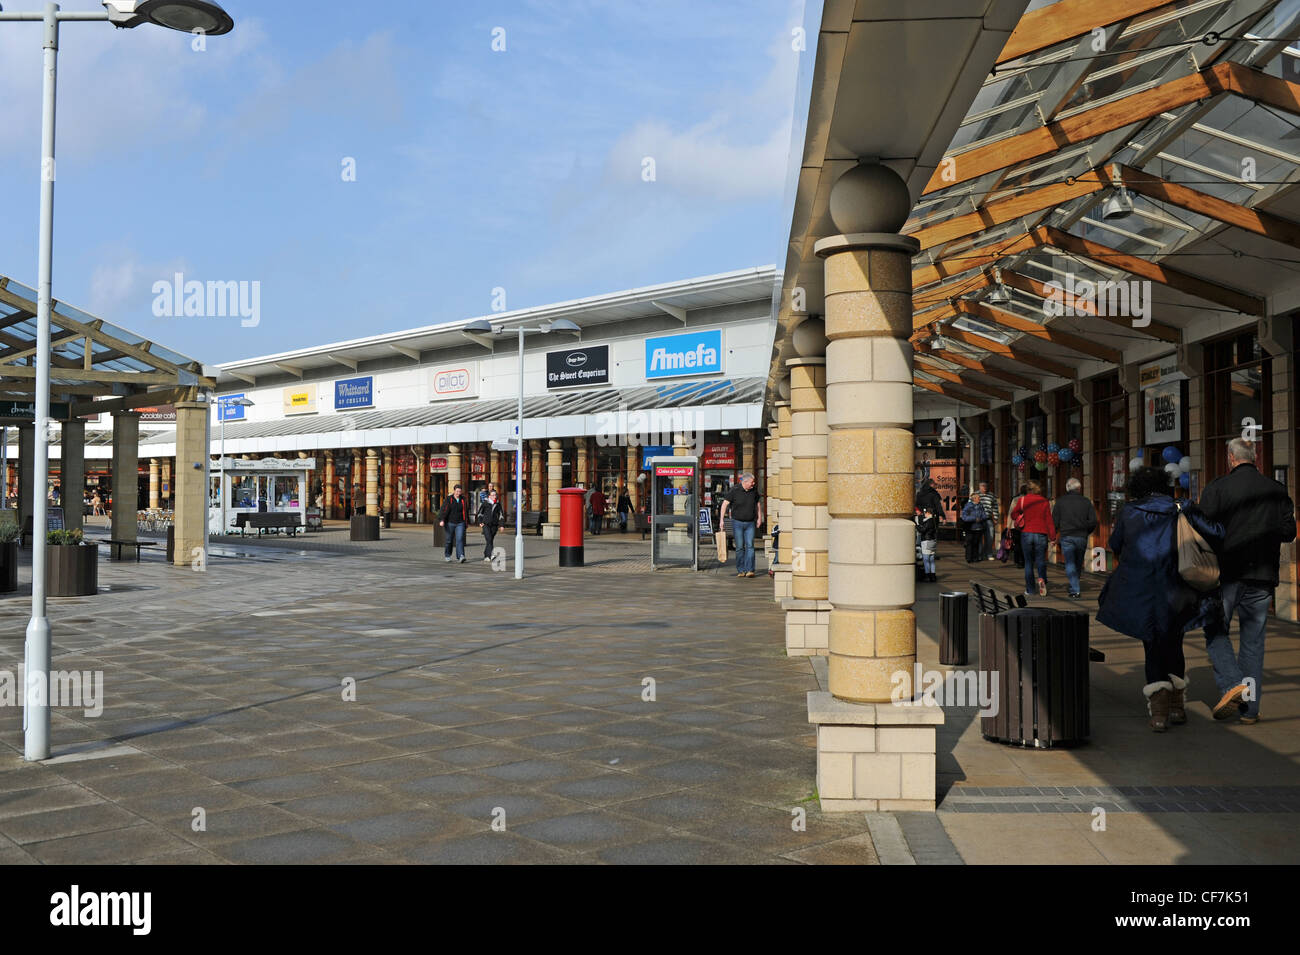 The Lakeside Village Outlet Shopping Developement in Doncaster Yorkshire UK Stock Photo